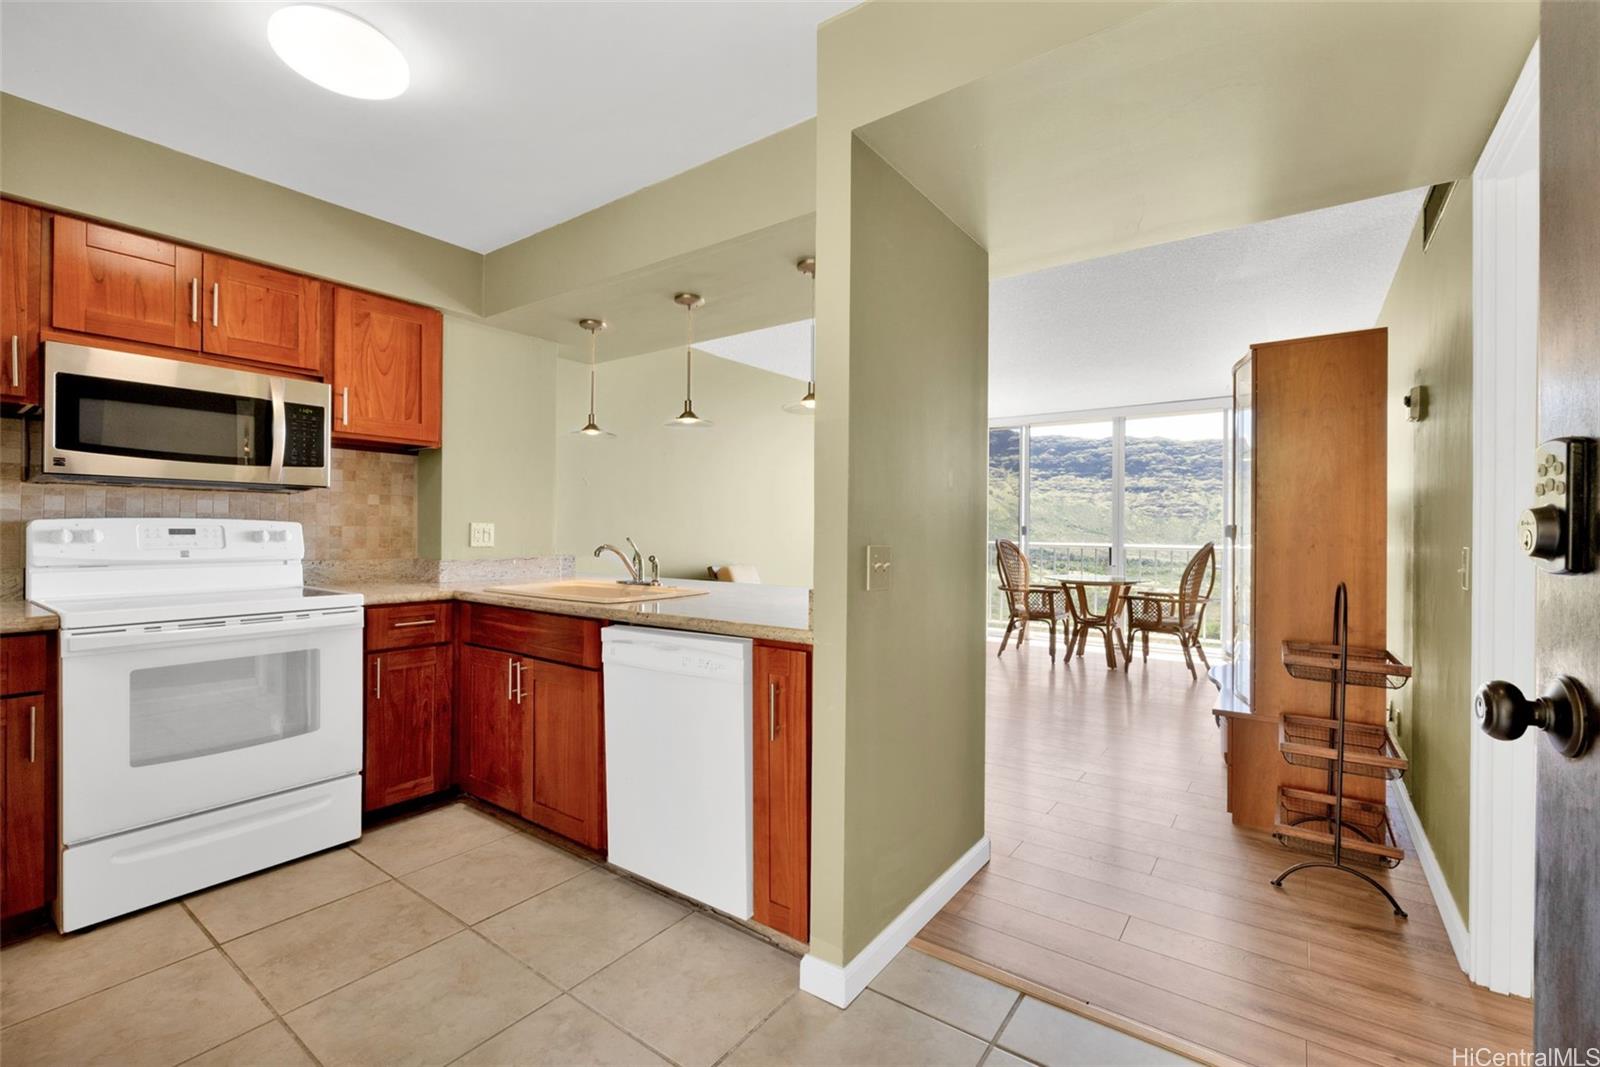 a kitchen with stainless steel appliances kitchen island granite countertop a stove a sink and a microwave